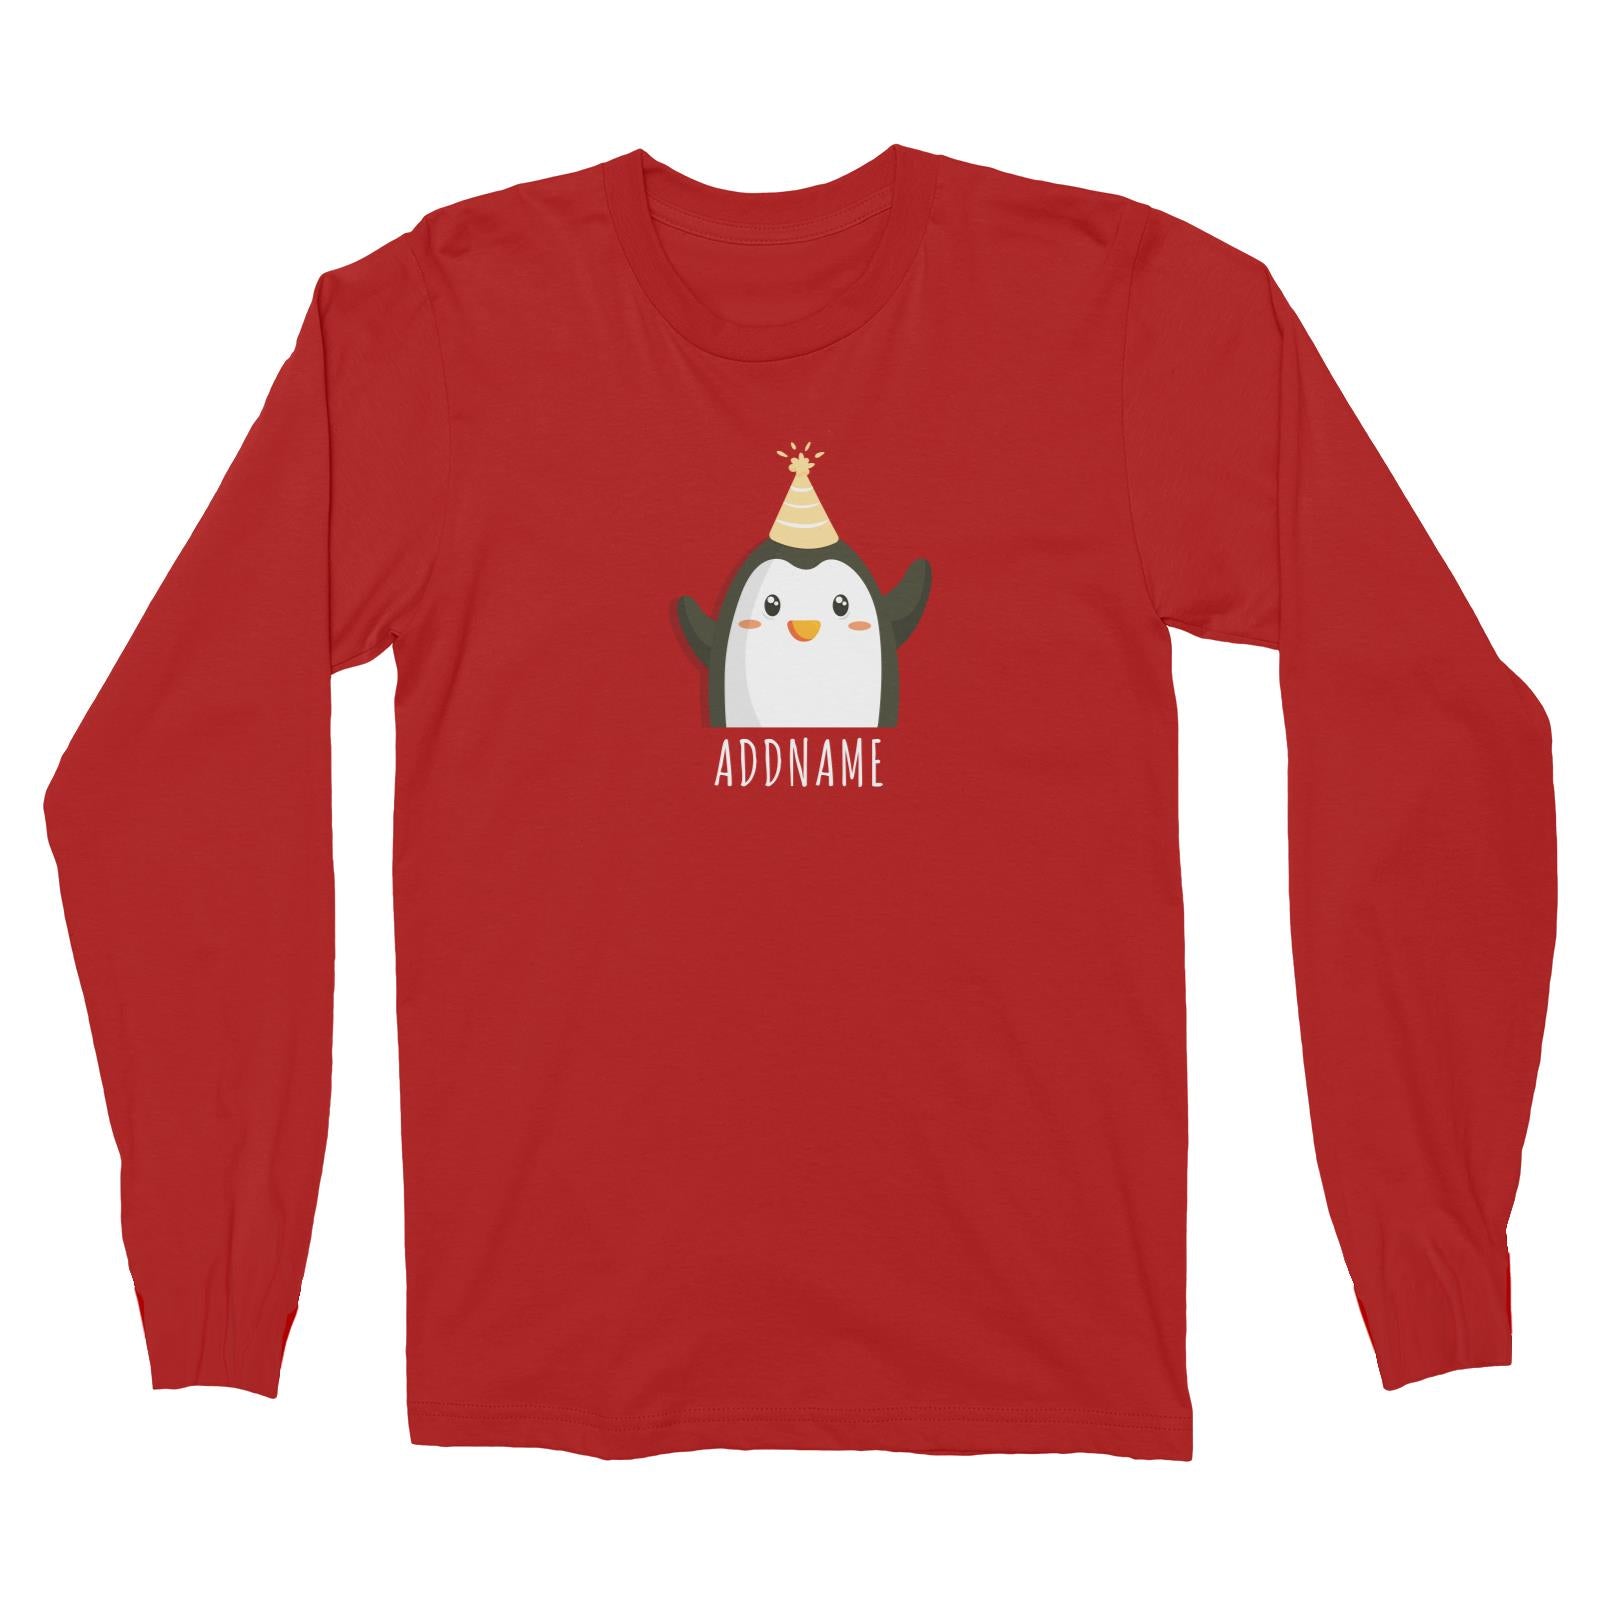 Birthday Cute Penguin Wearing Party Hat Addname Long Sleeve Unisex T-Shirt